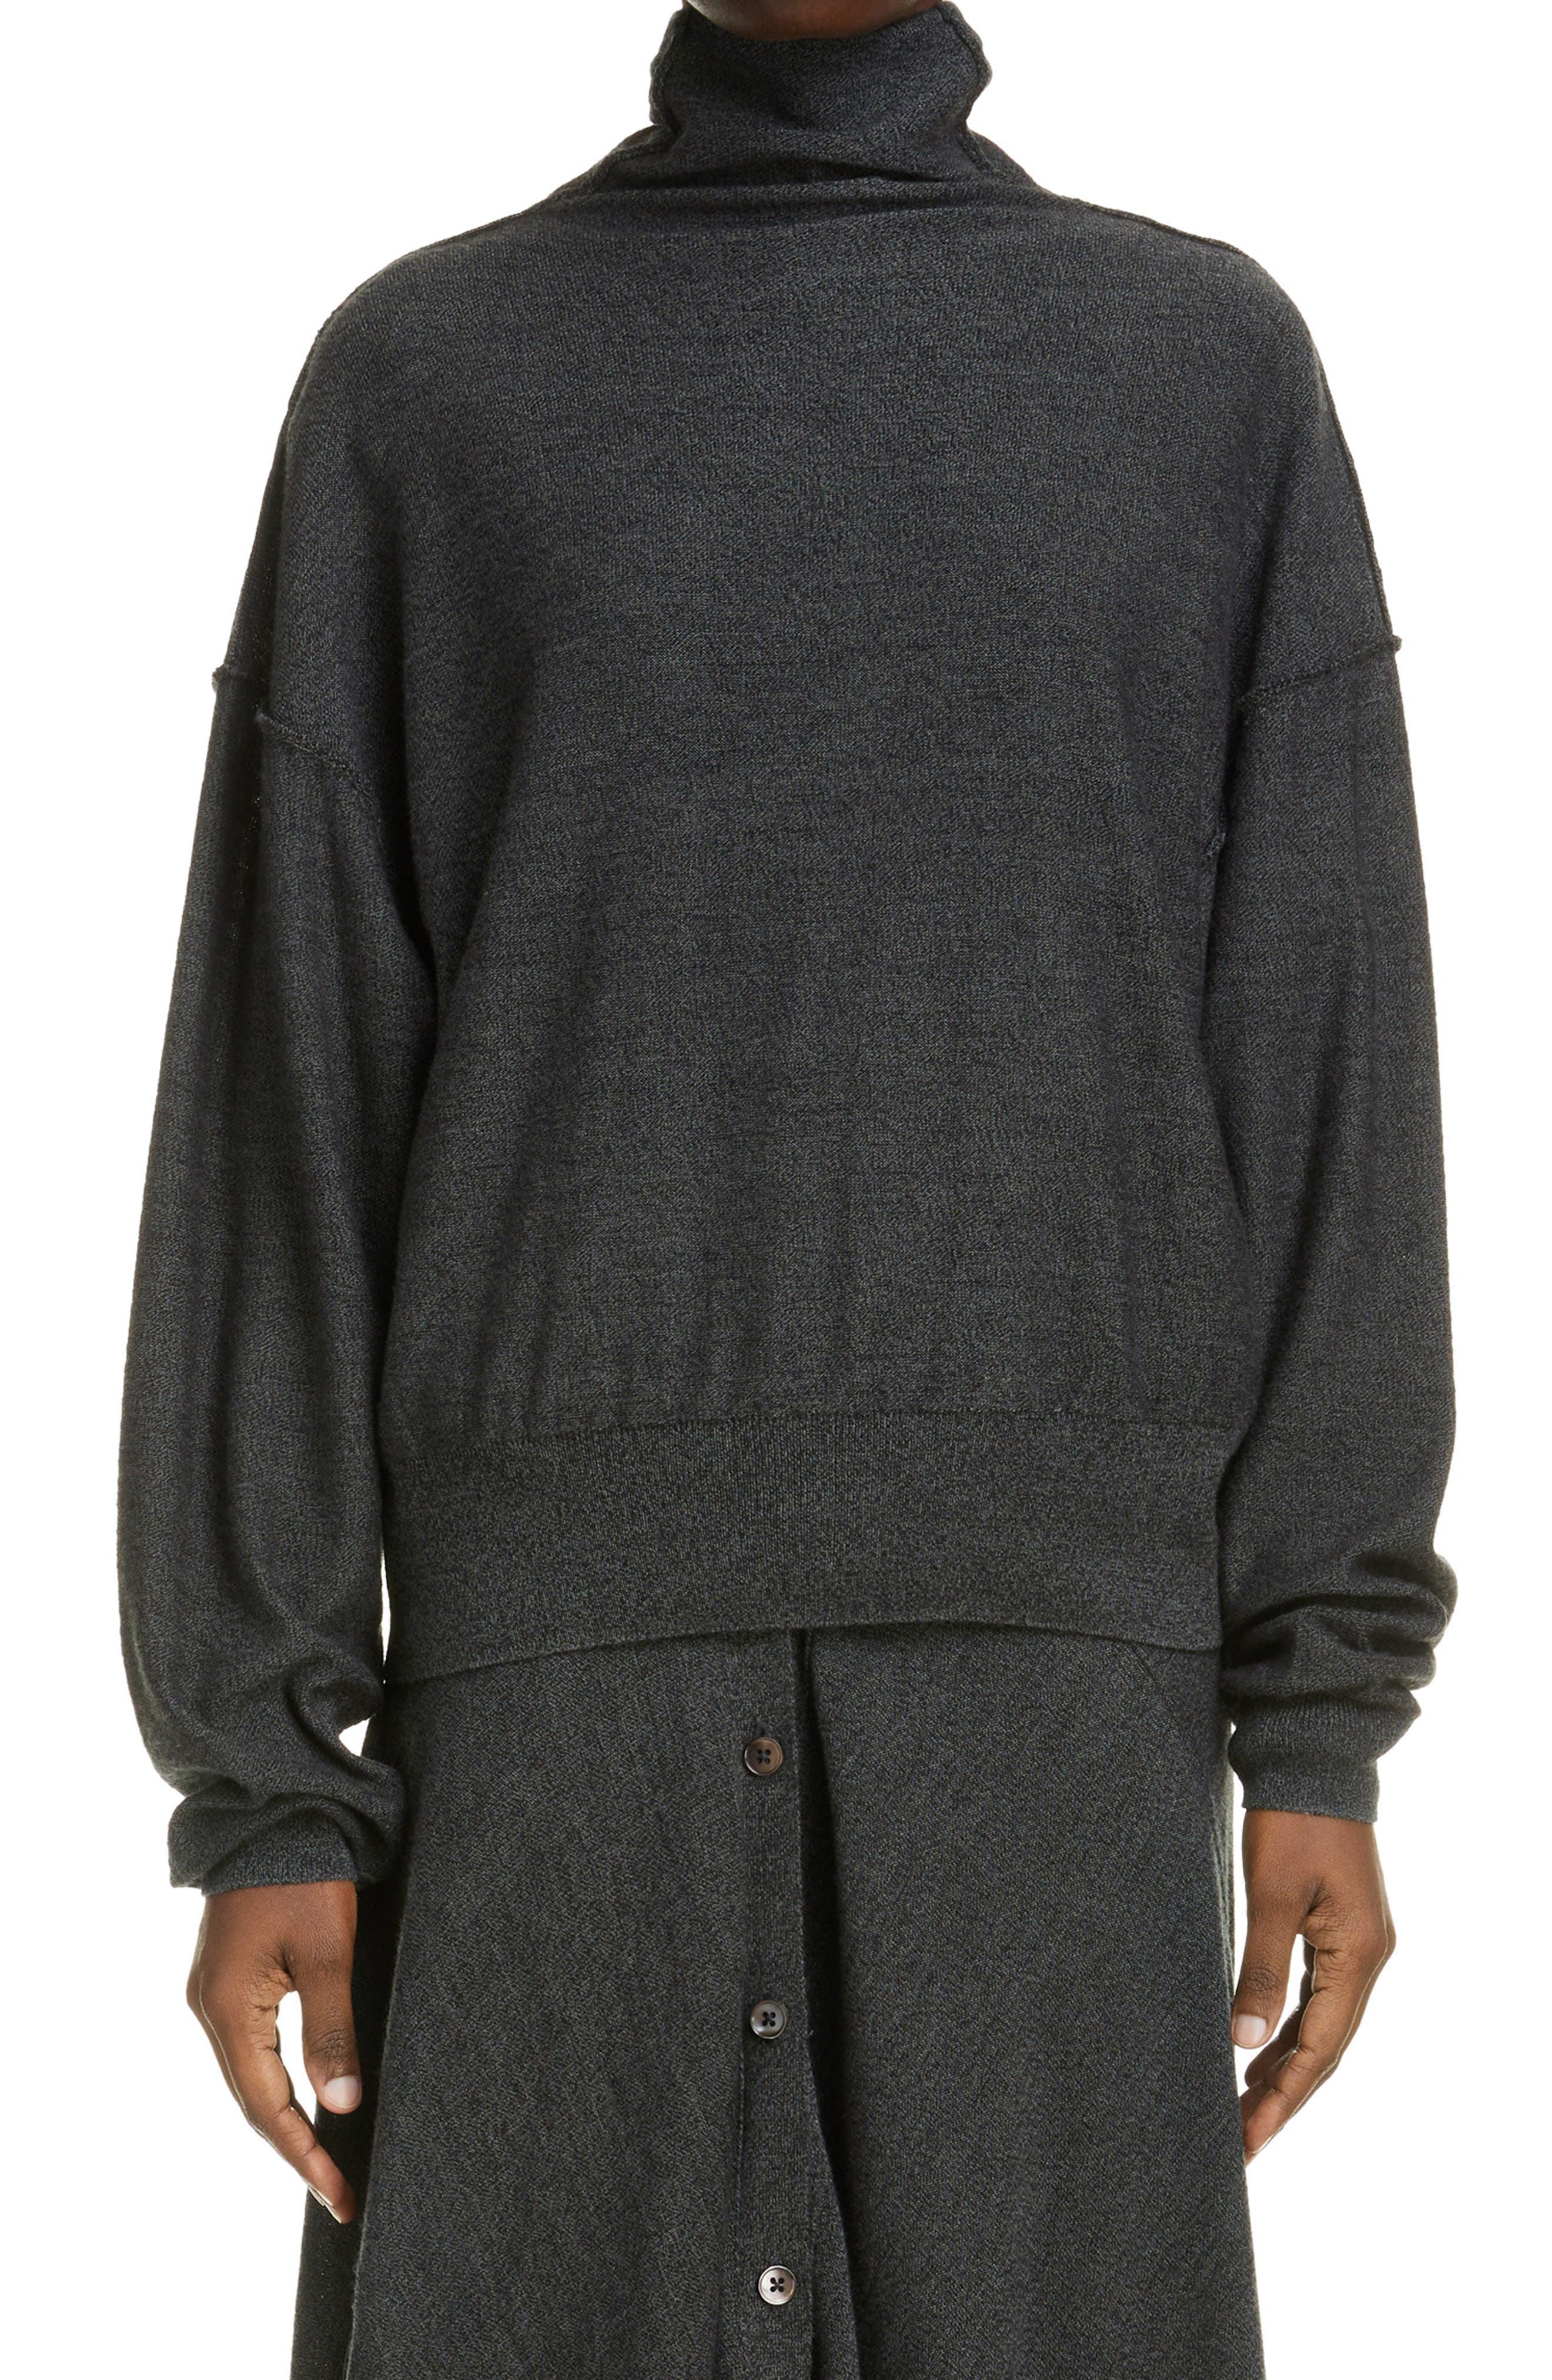 Lemaire Reversible Funnel Neck Wool Sweater | Smart Closet